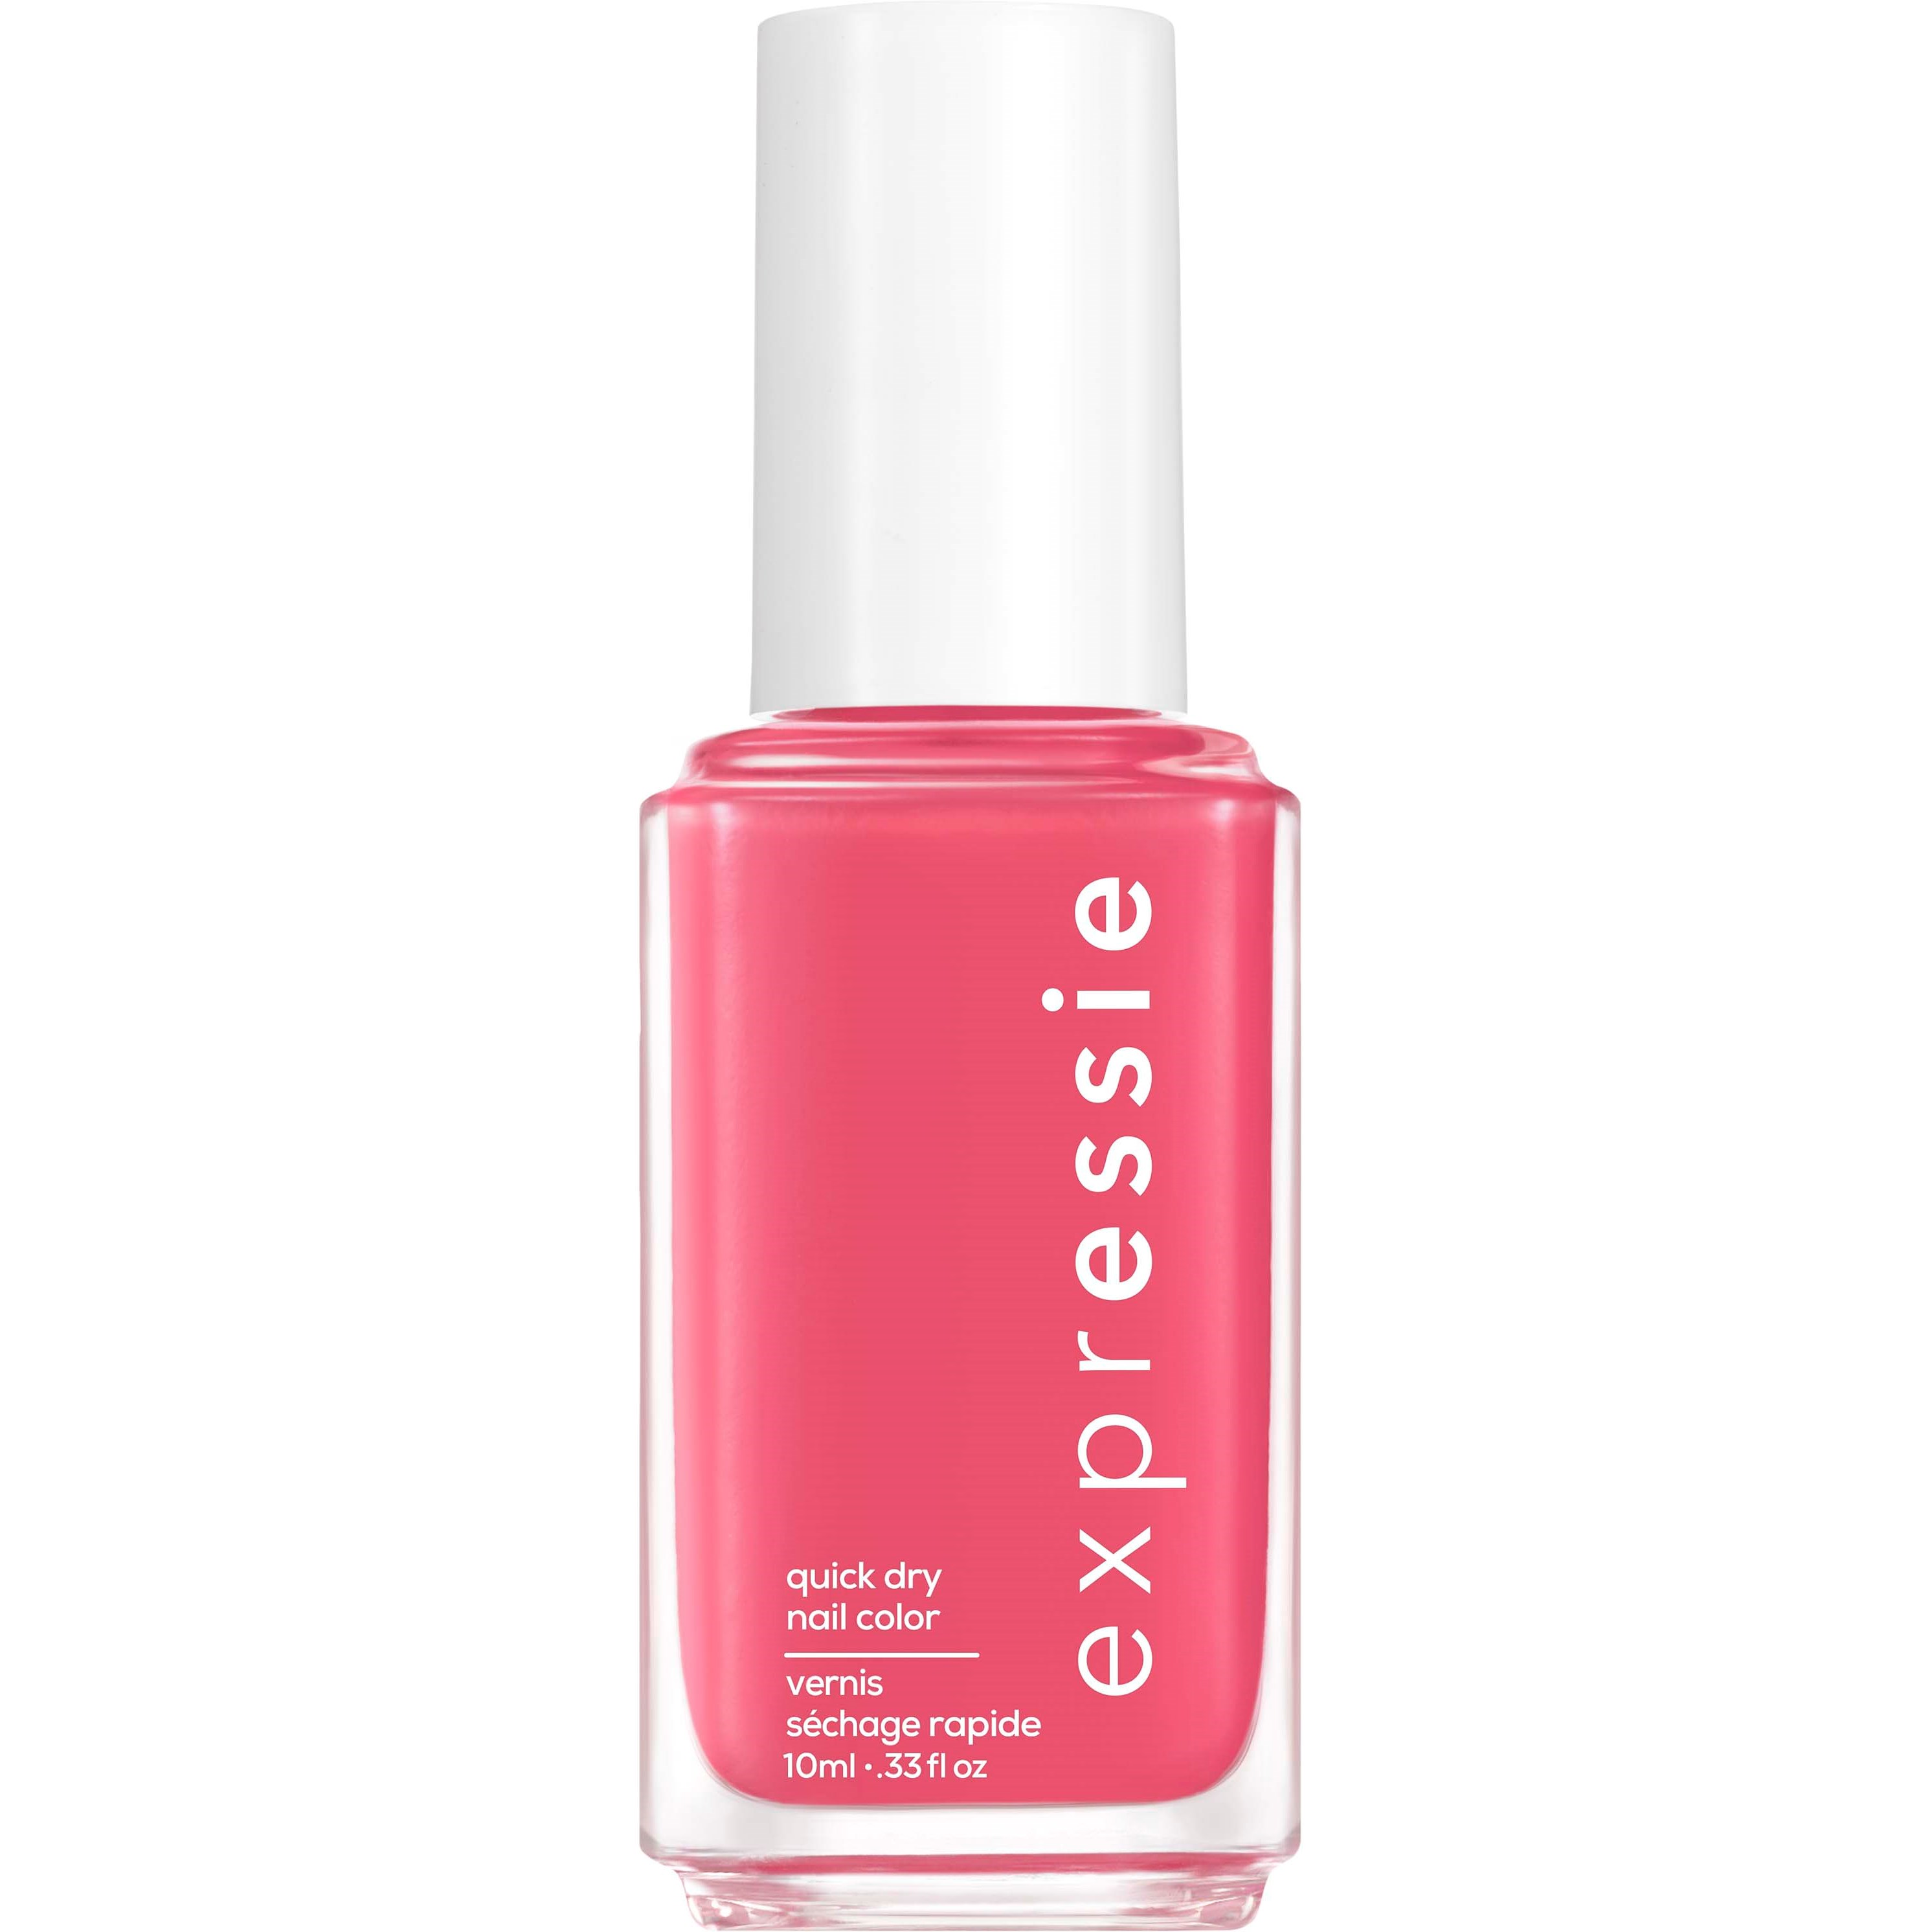 Bilde av Essie Expressie Quick Dry Nail Color Crave The Chaos 235